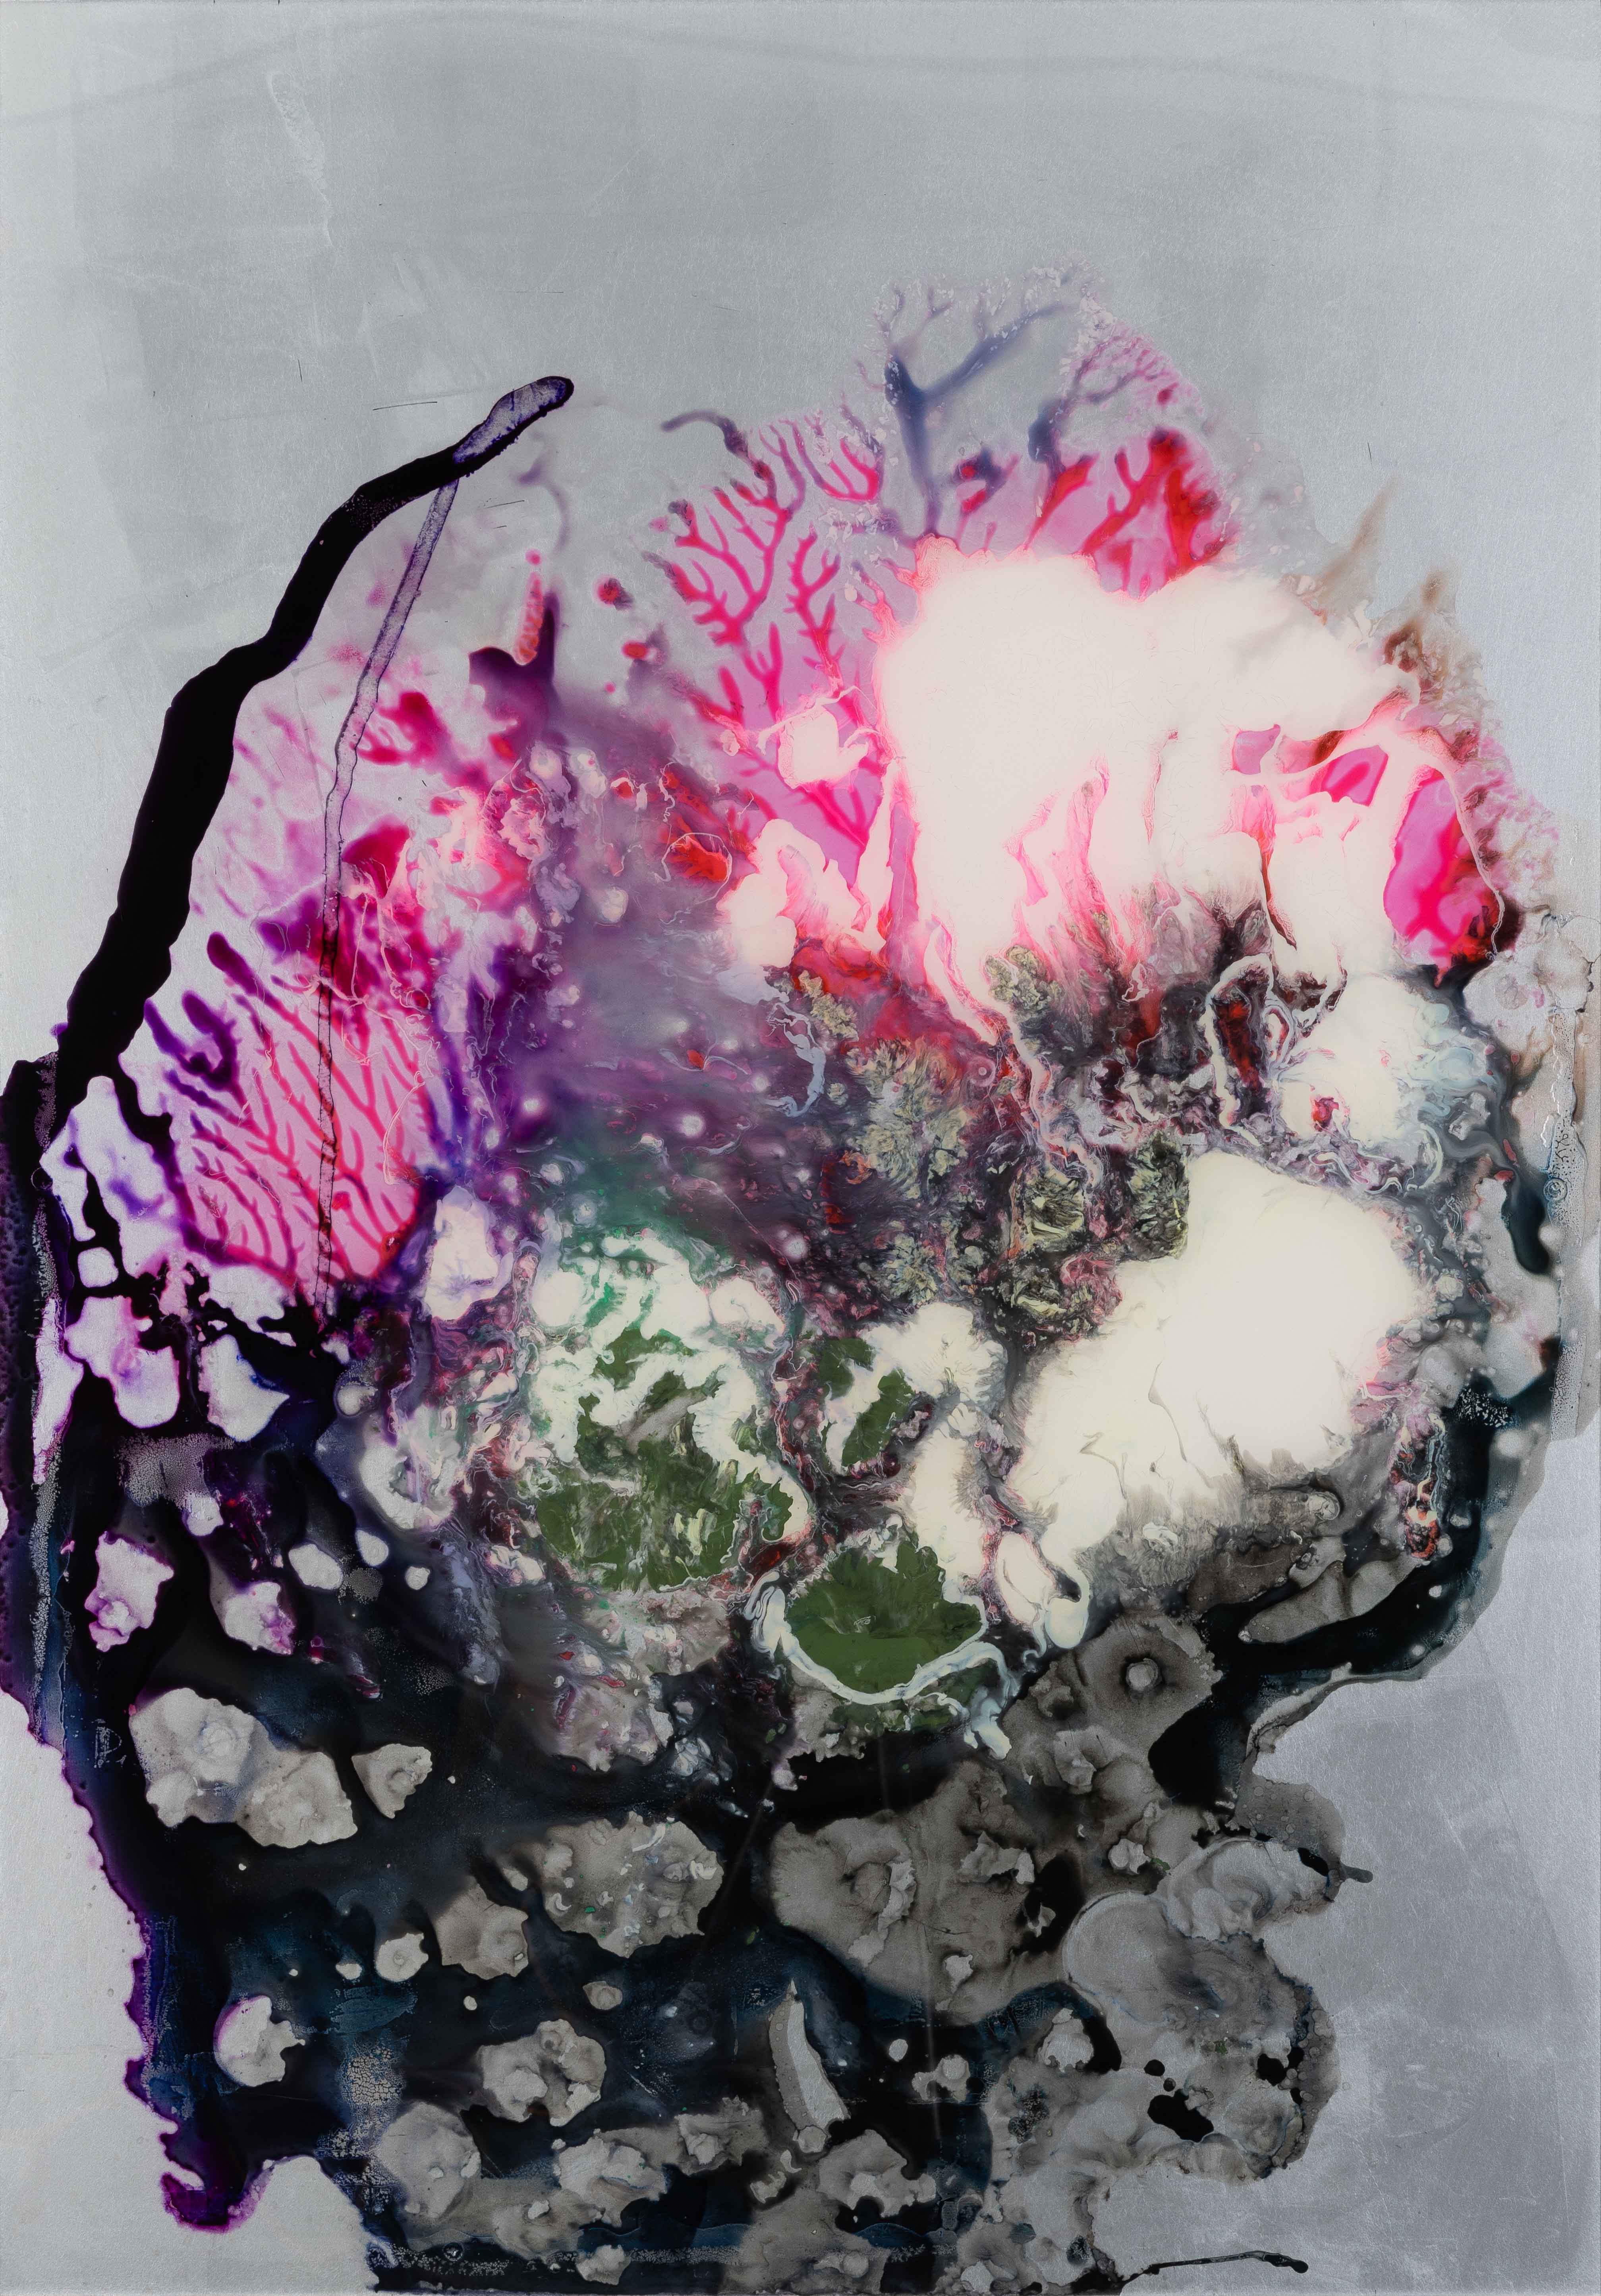 A work by Michael Burges with a color play of purple, pink, black and grey